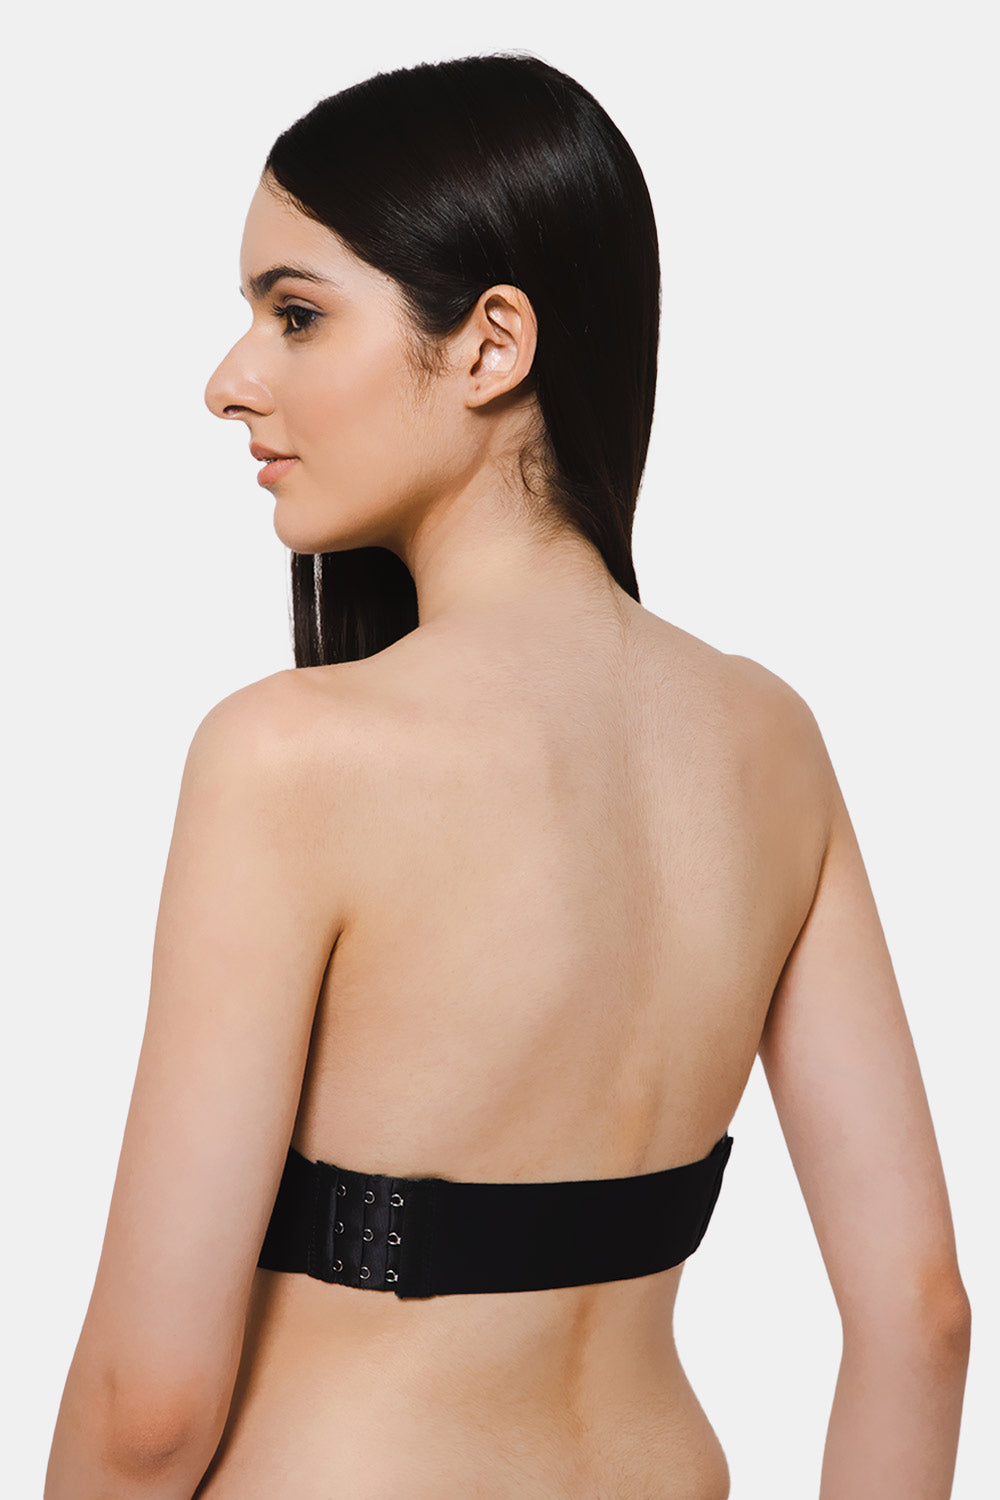 Full coverage backless padded bra with transparent strap and band